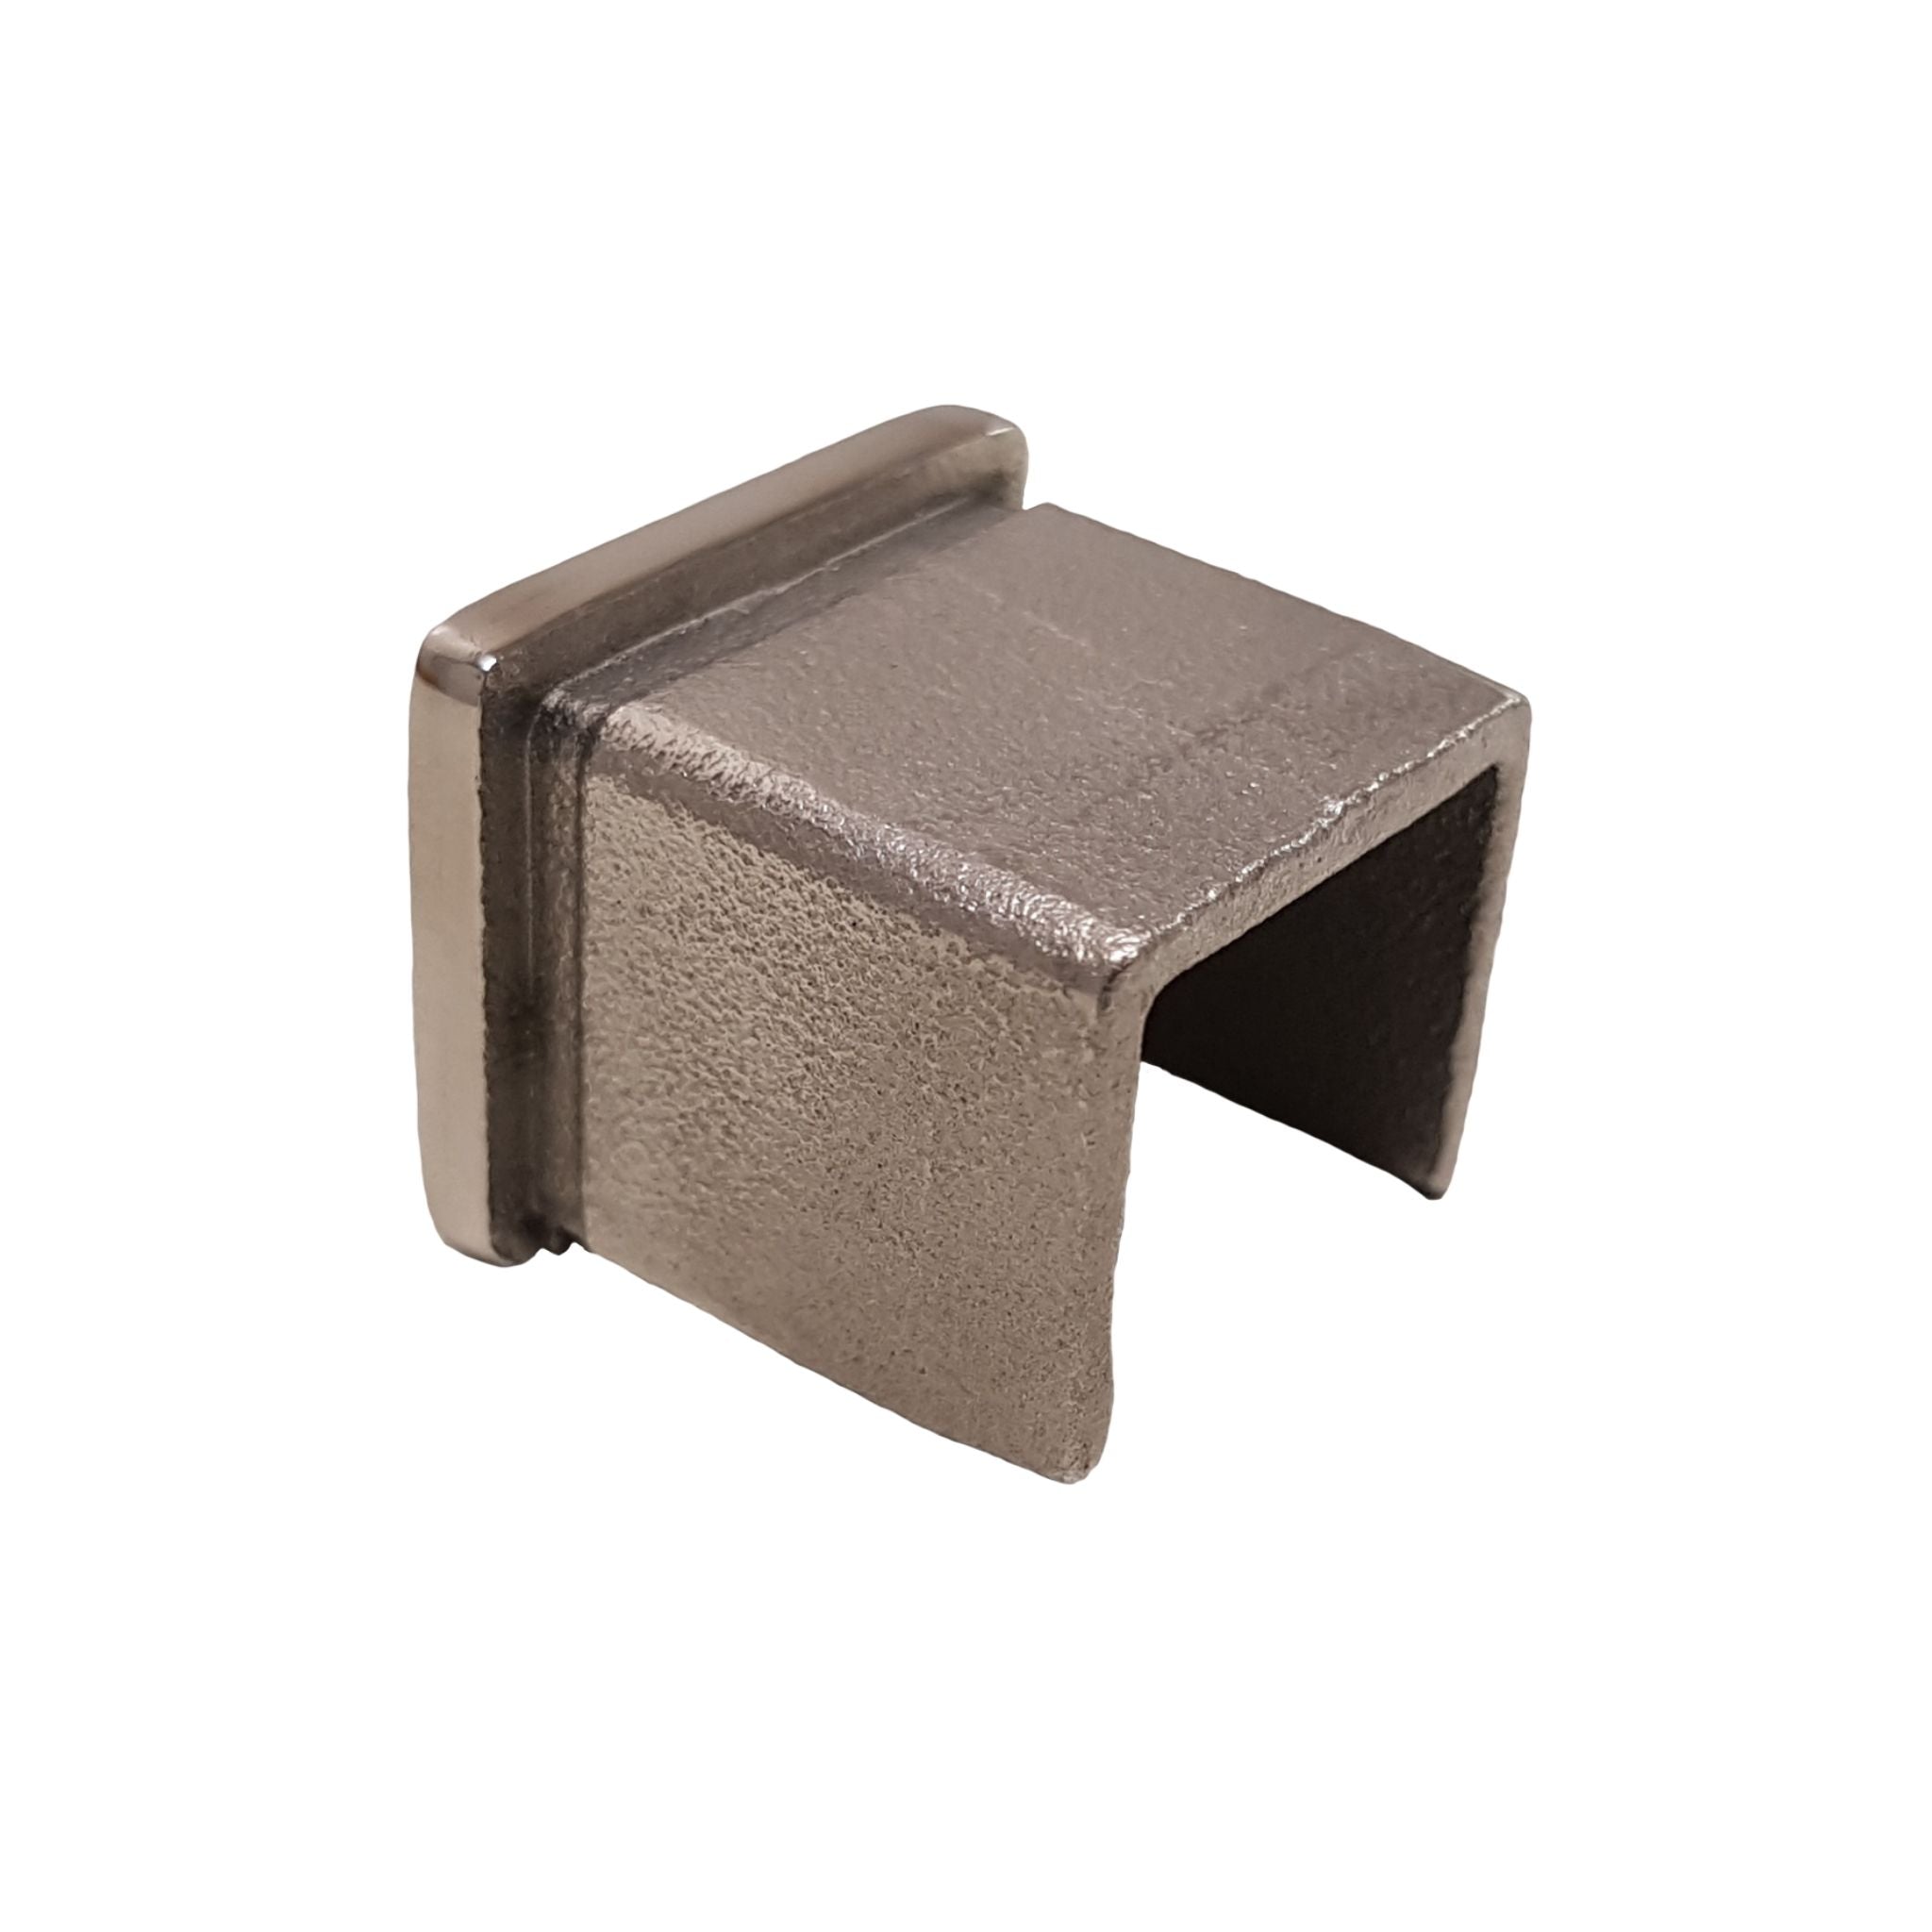 Slotted 21x25x14 - End Cap - Stainless Steel Products